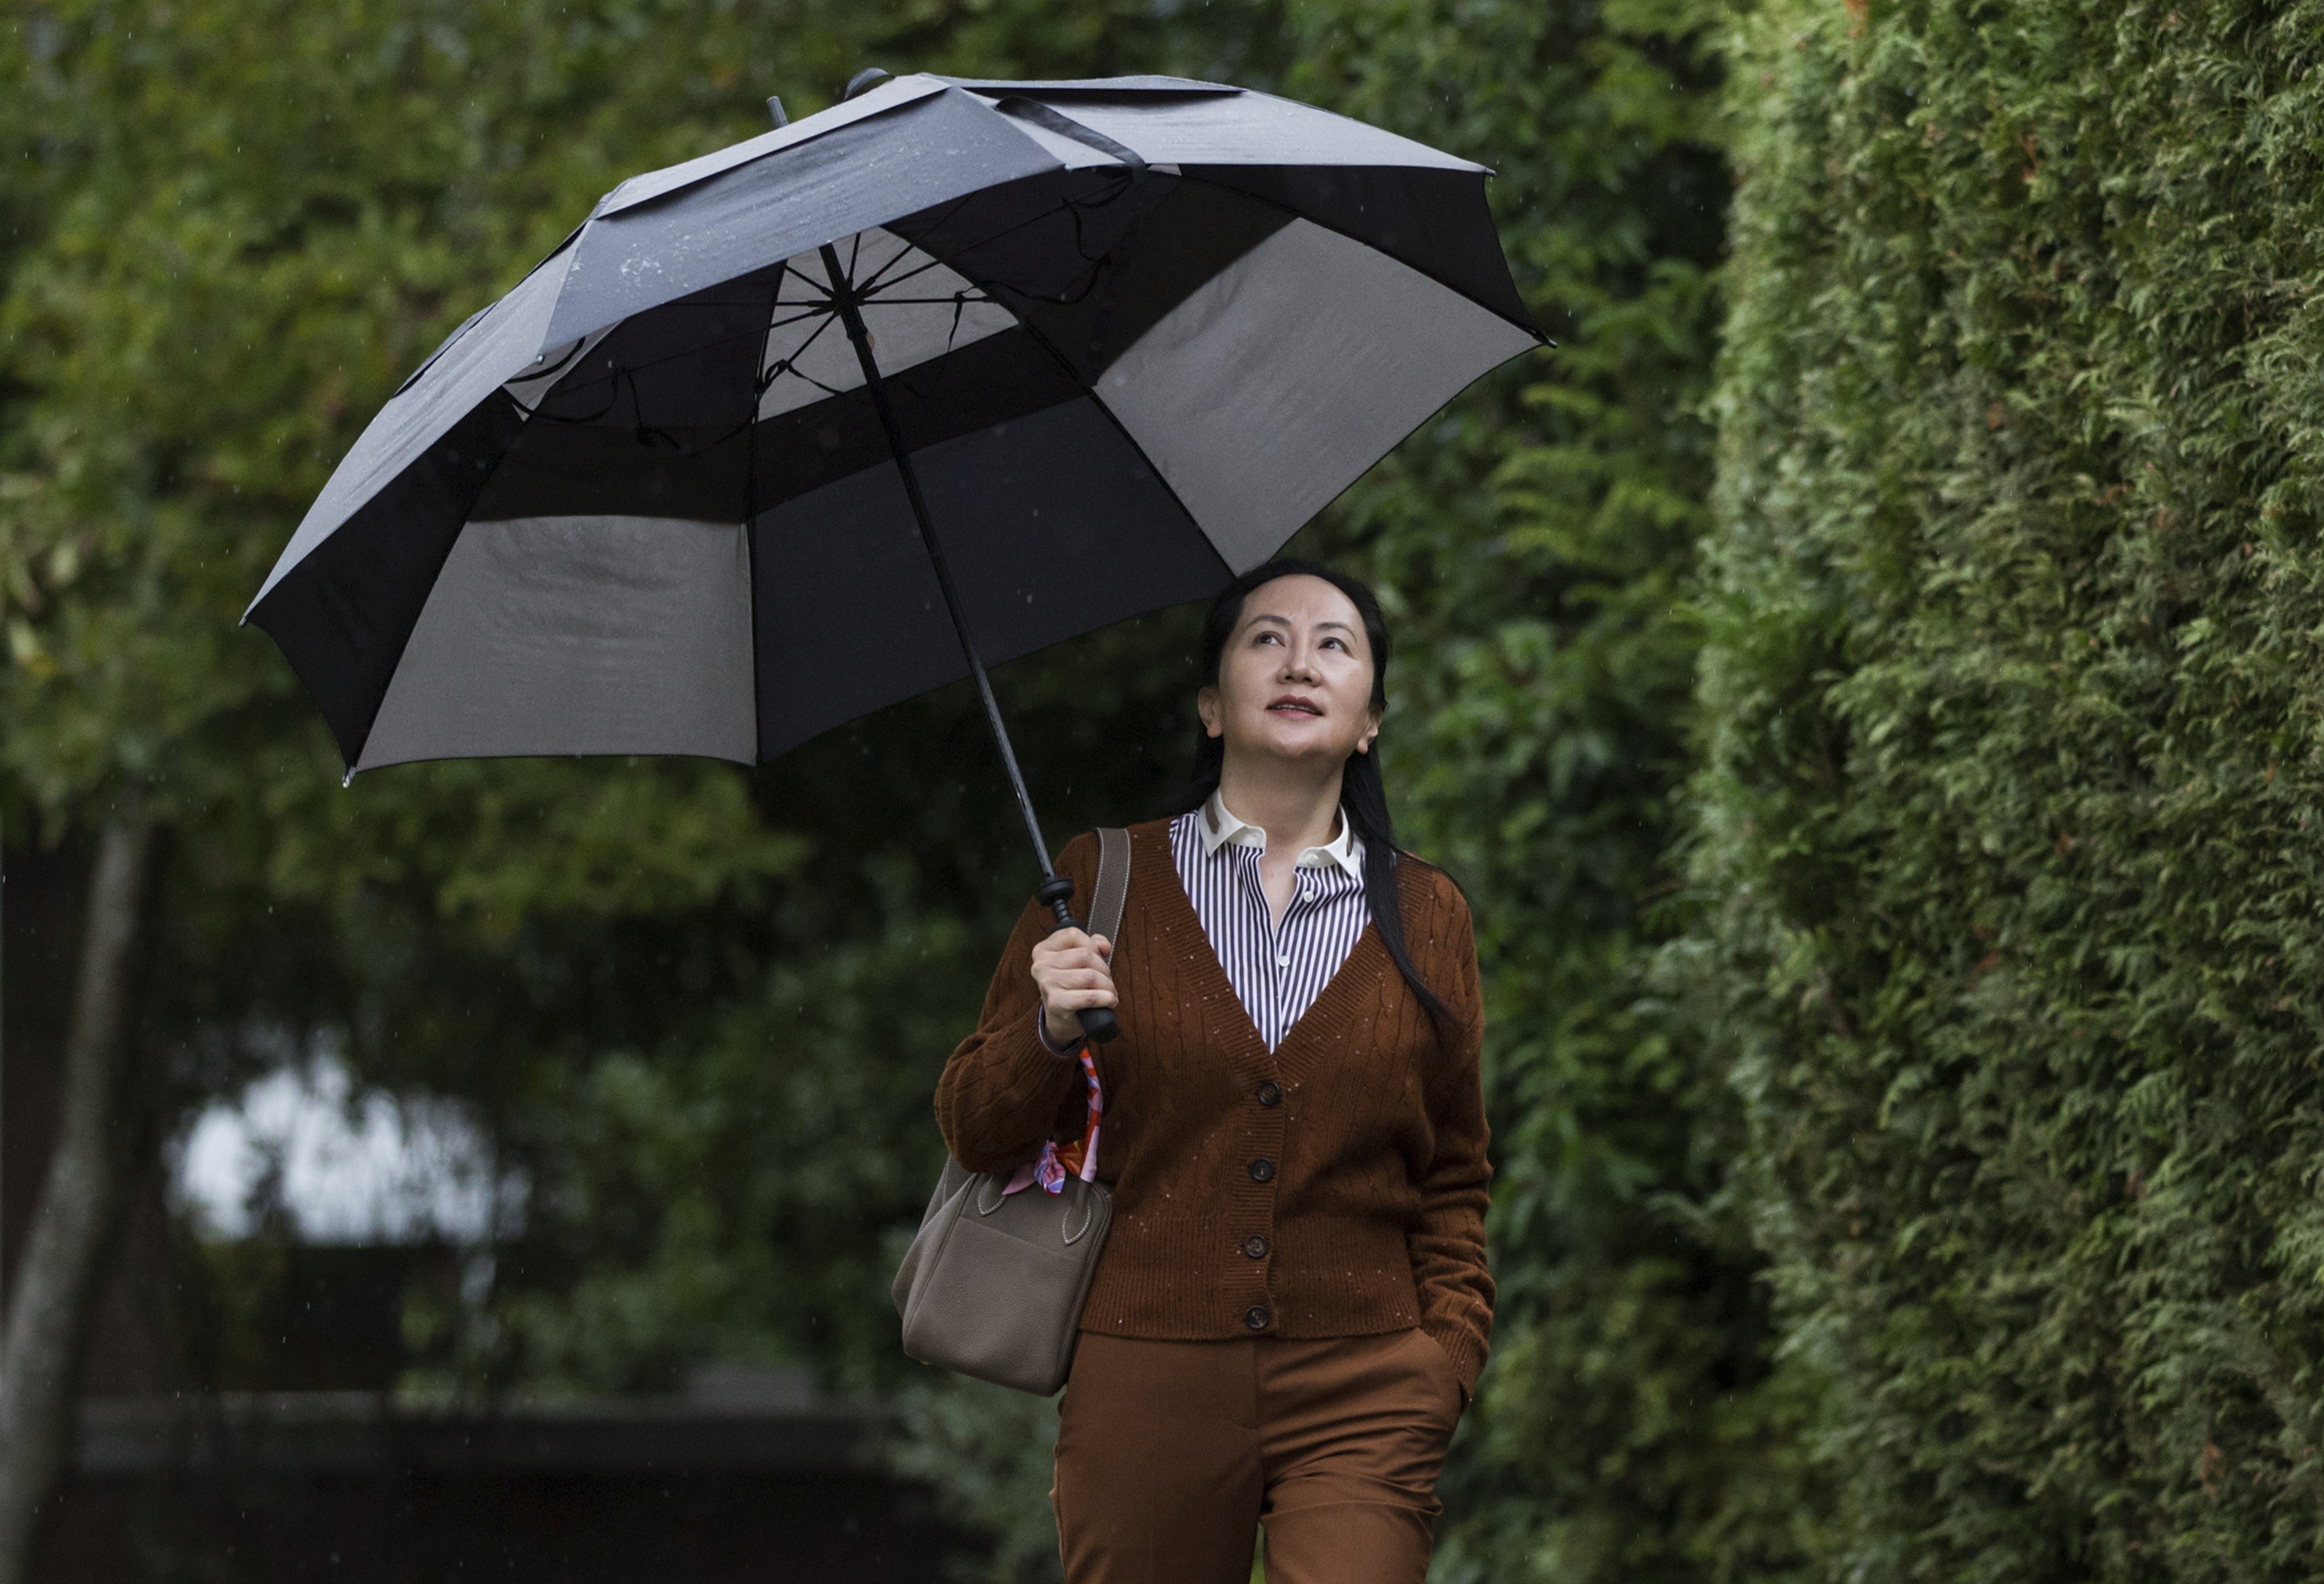 Huawei chief financial officer Meng Wanzhou shields herself from rain as she leaves her home to attend a court hearing in Vancouver, British Columbia, on Thursday. Photo: The Canadian Press via AP